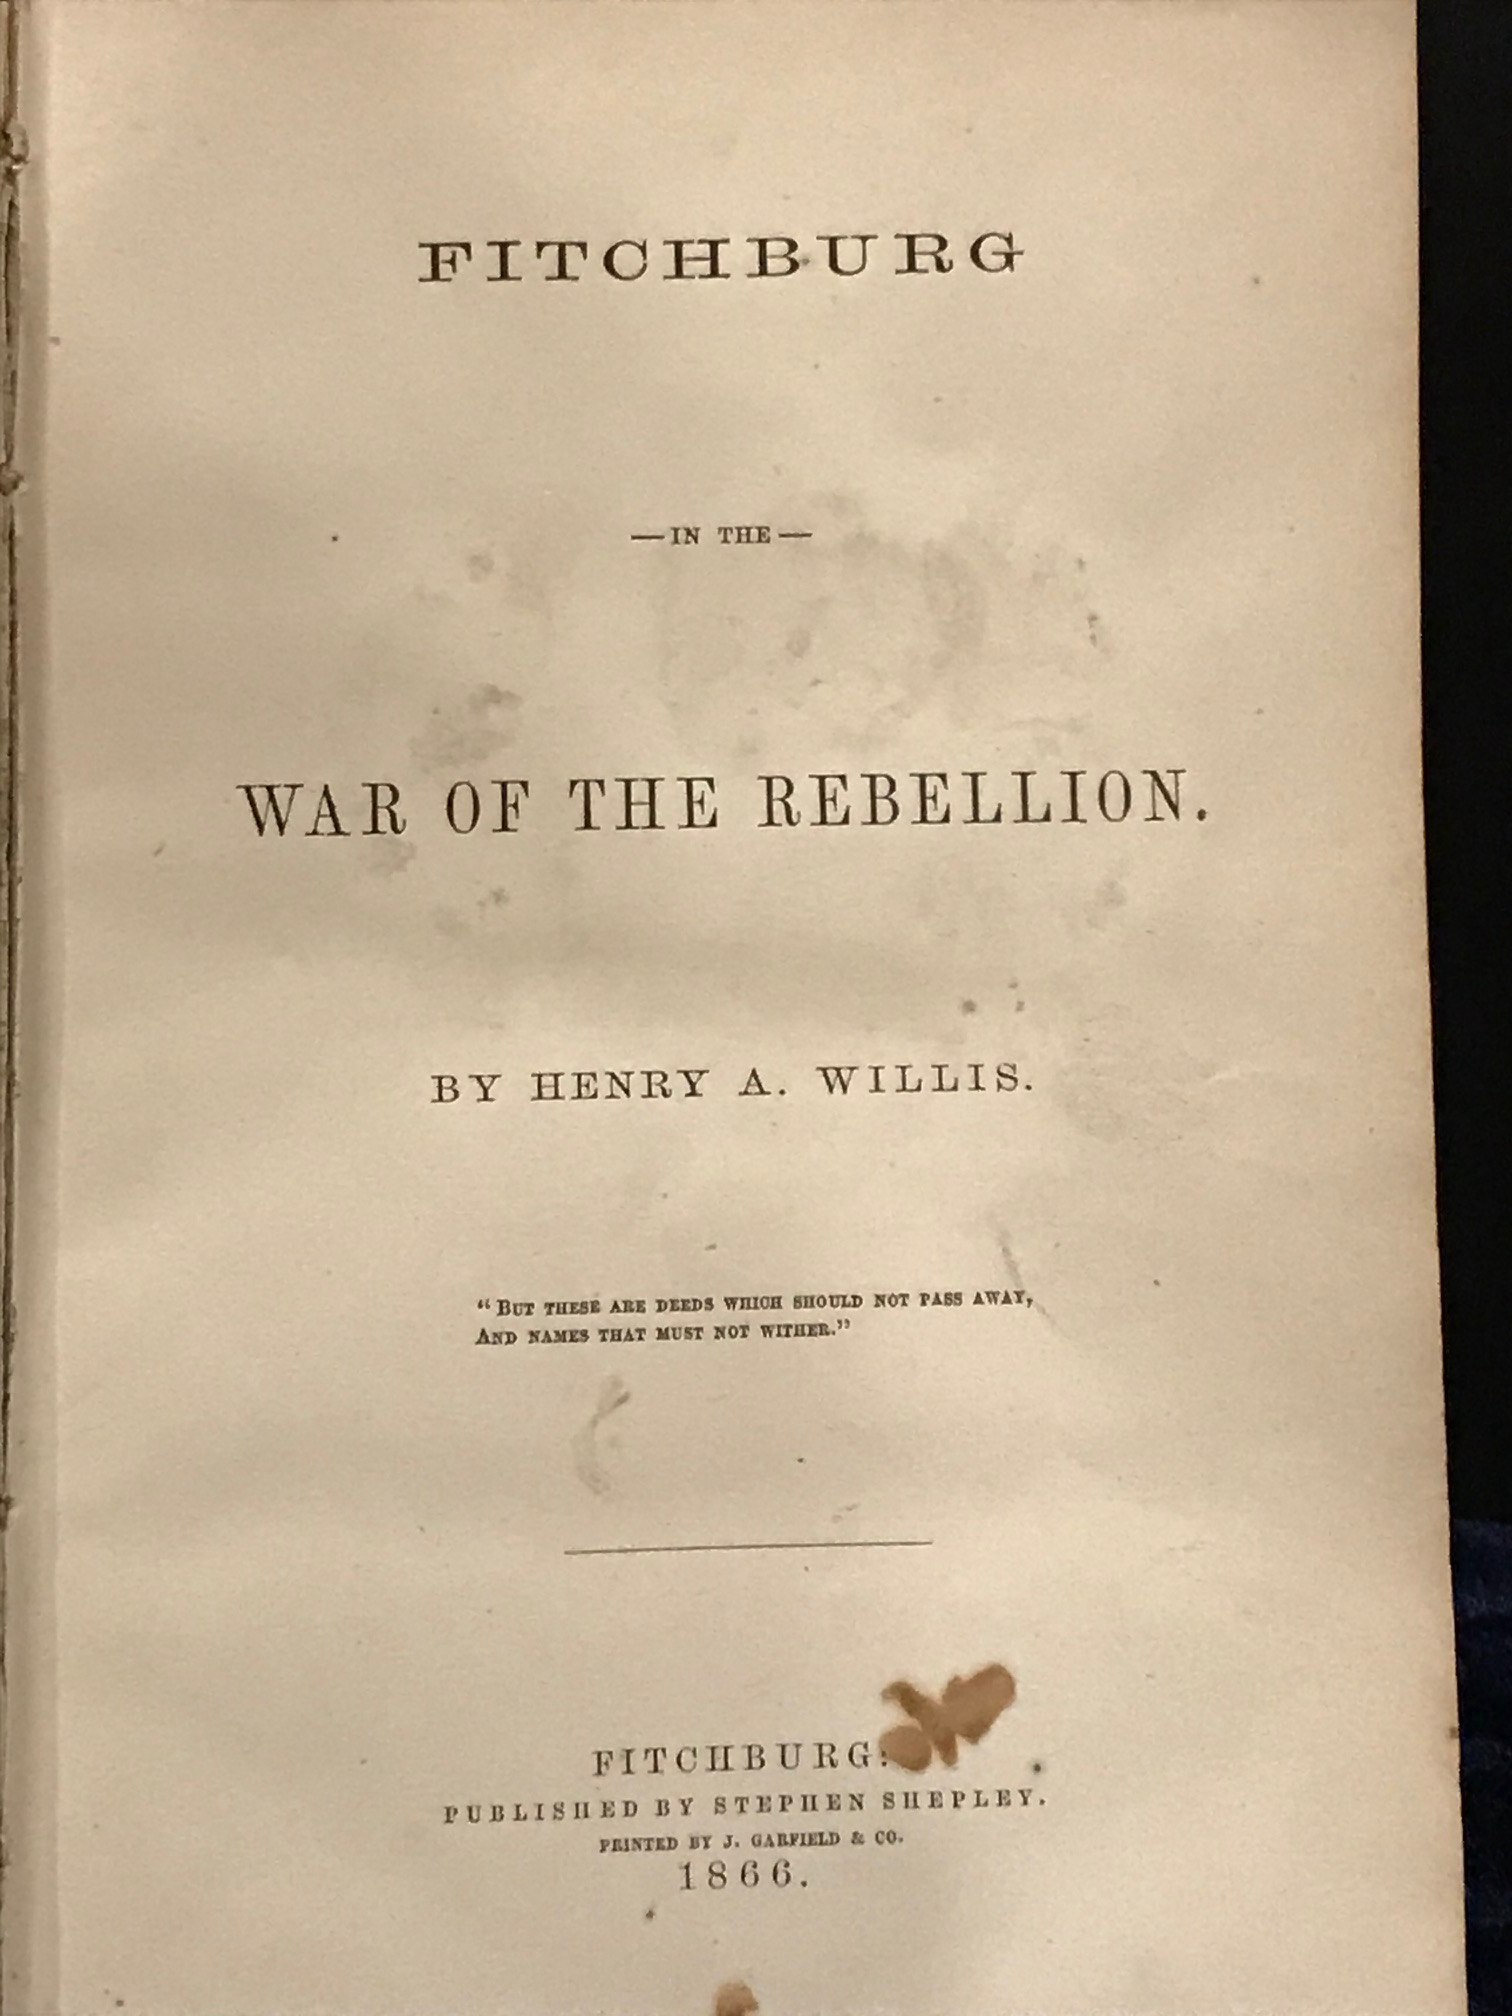 Fitchburg and the War of the Rebellion by Henry A. Willis